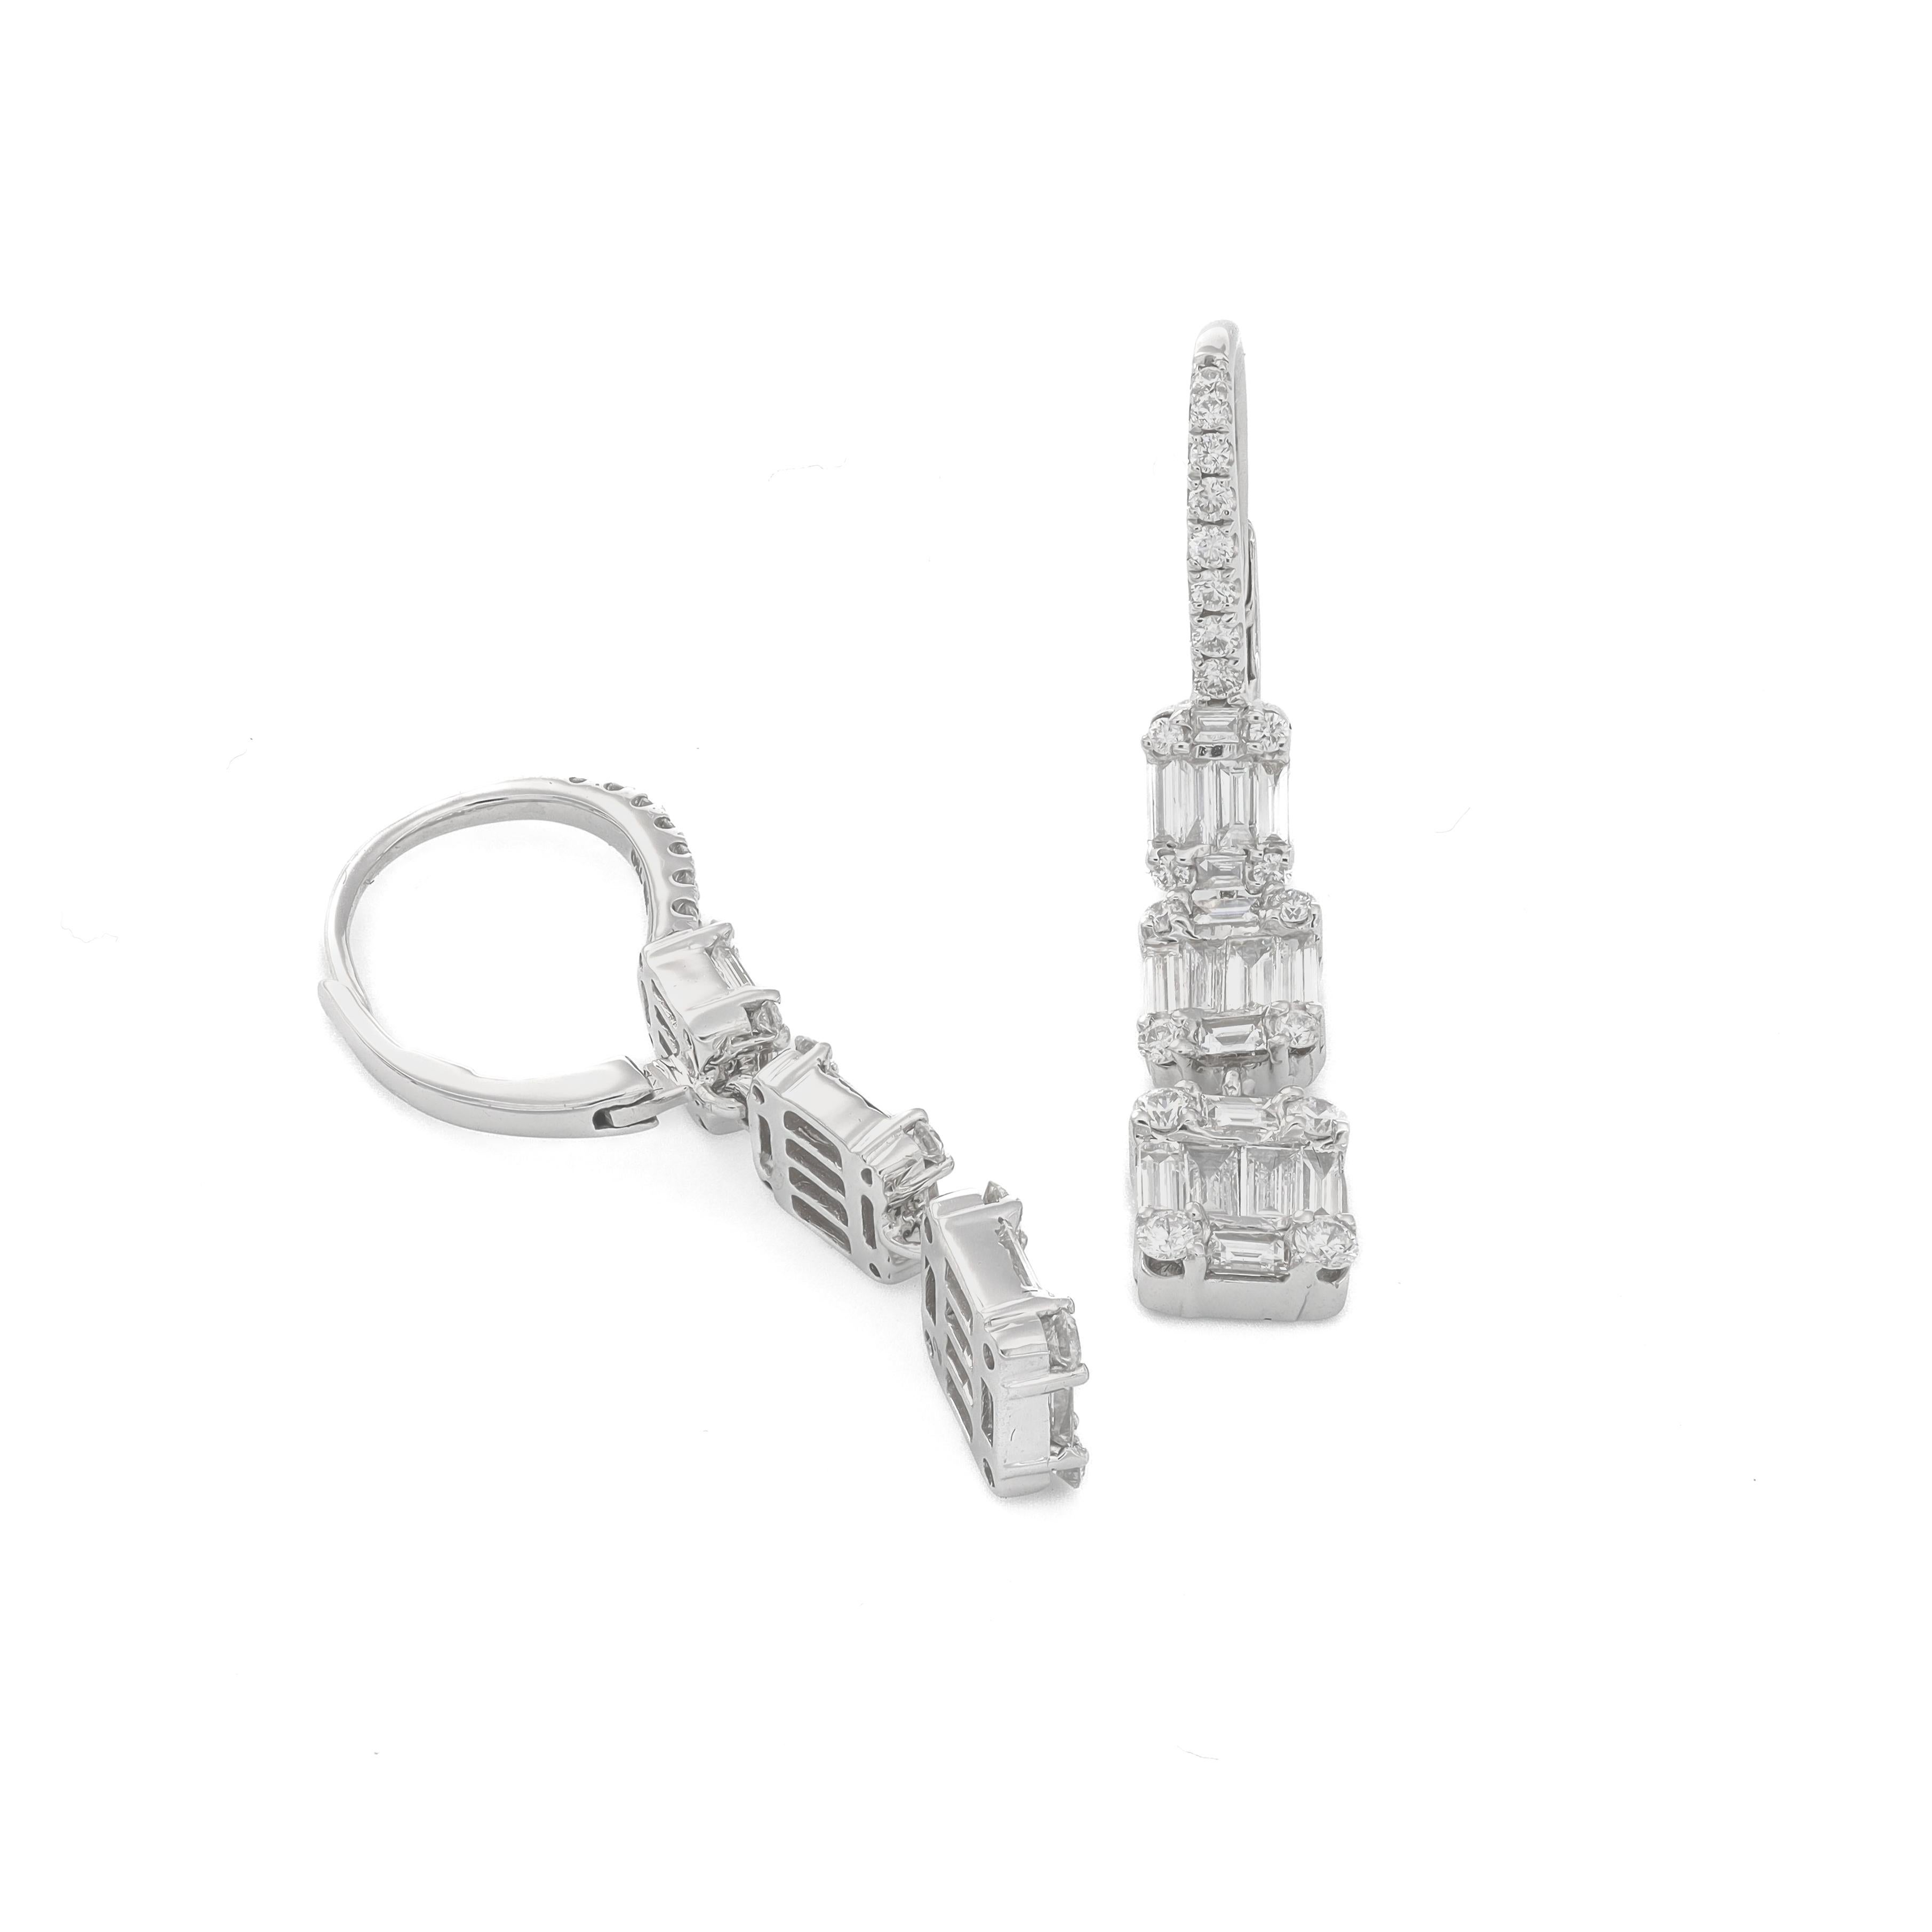 Immerse yourself in the captivating allure of the 18KT White Gold Baguette and Round 3 Cluster Drop Dangler Earring, a true masterpiece of jewelry artistry designed to enchant women of all ages. Each element of these earrings has been crafted with